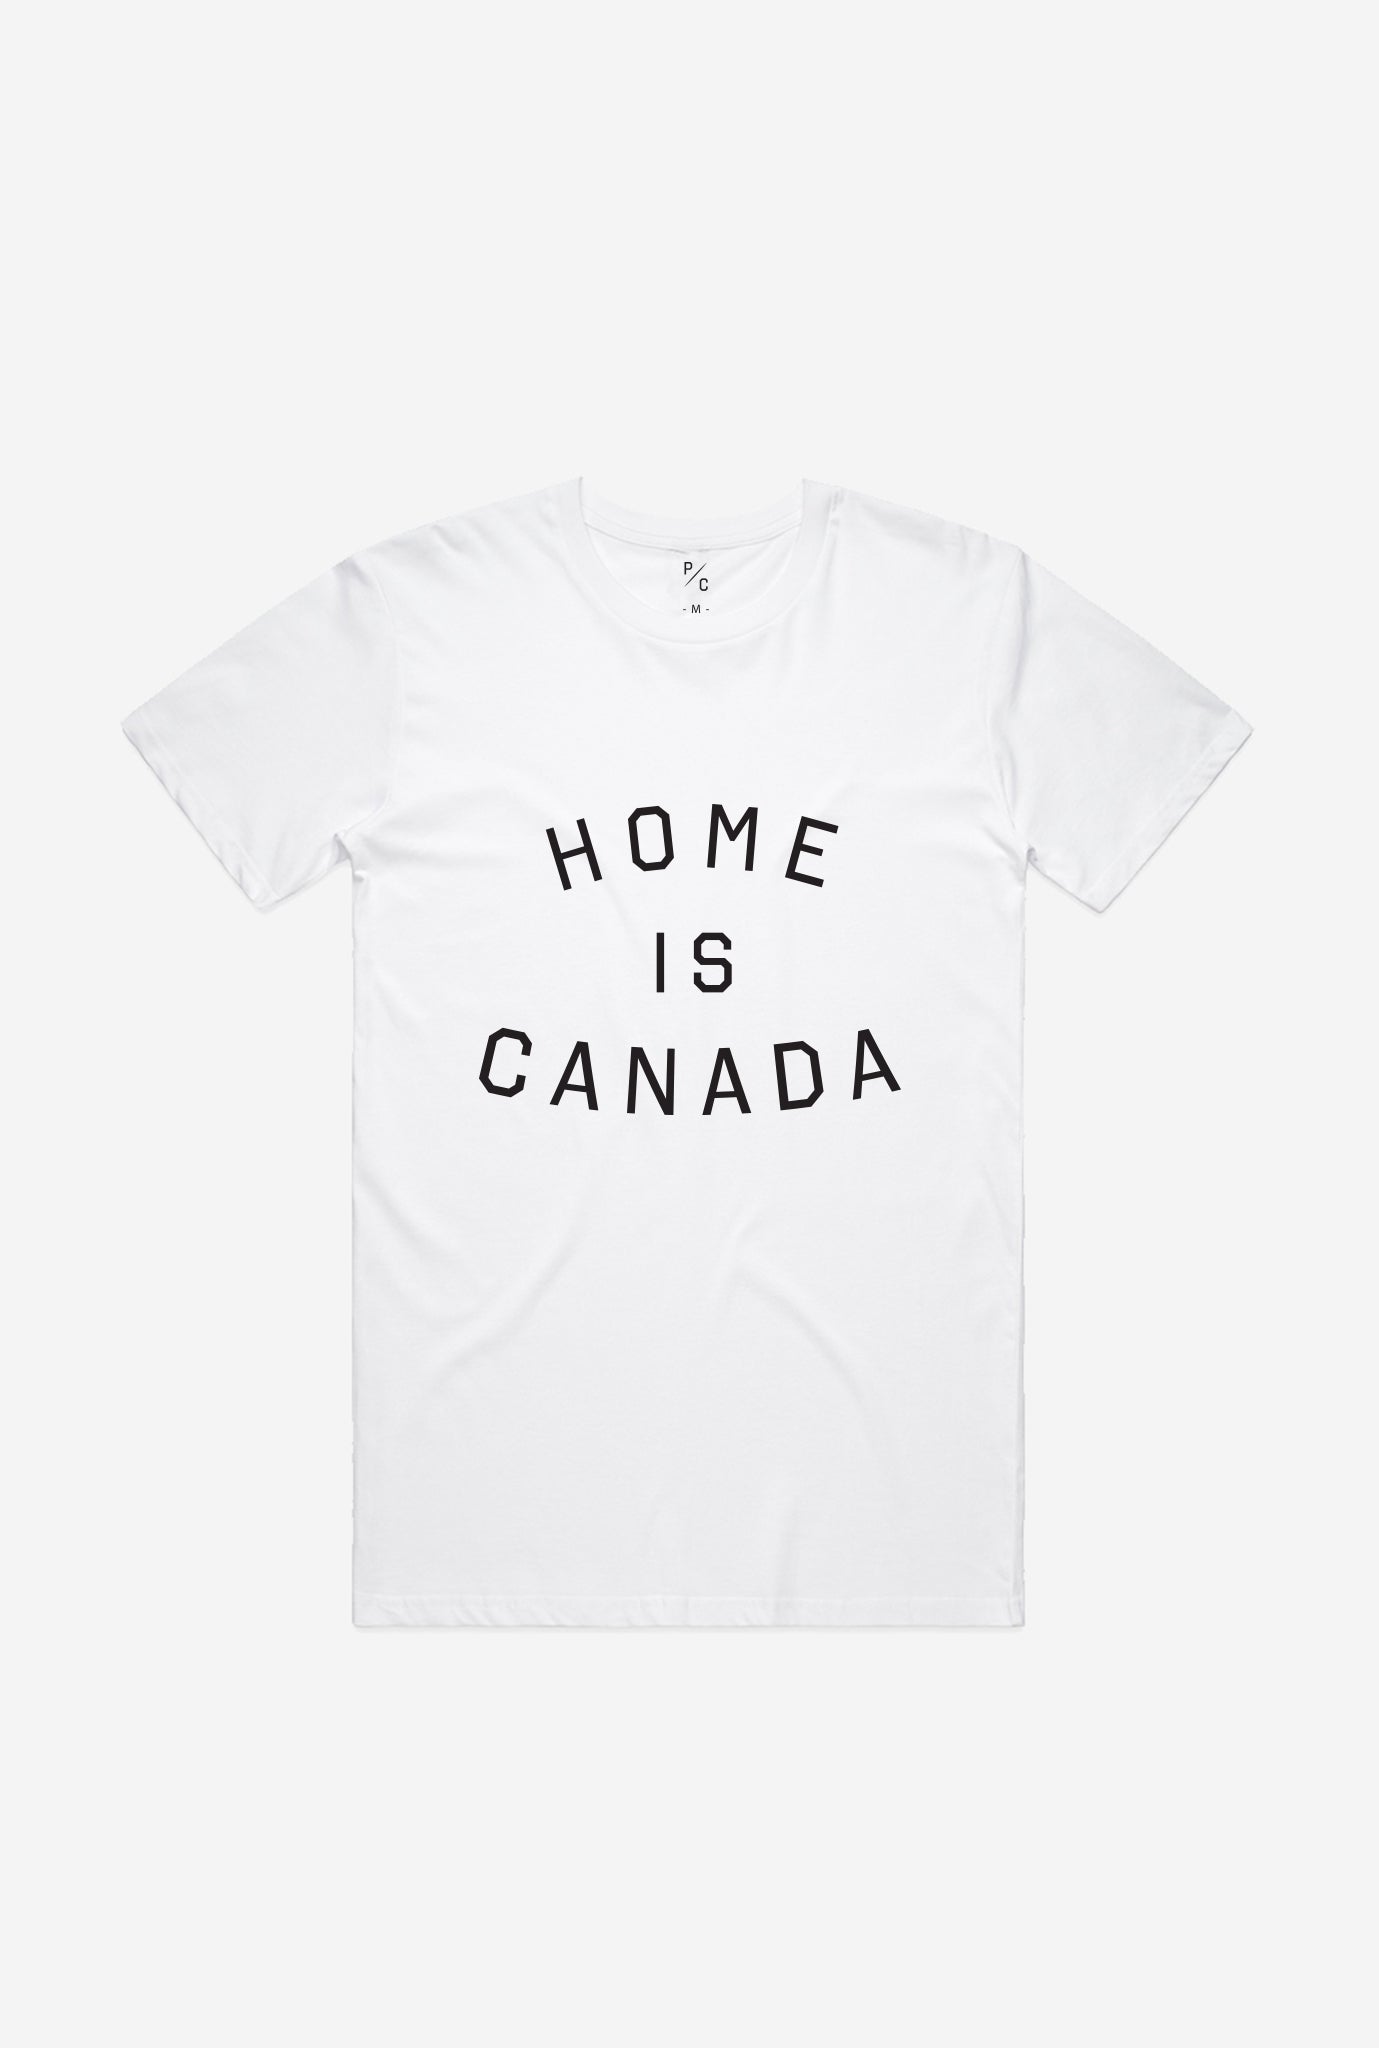 Home is Canada T-Shirt - White